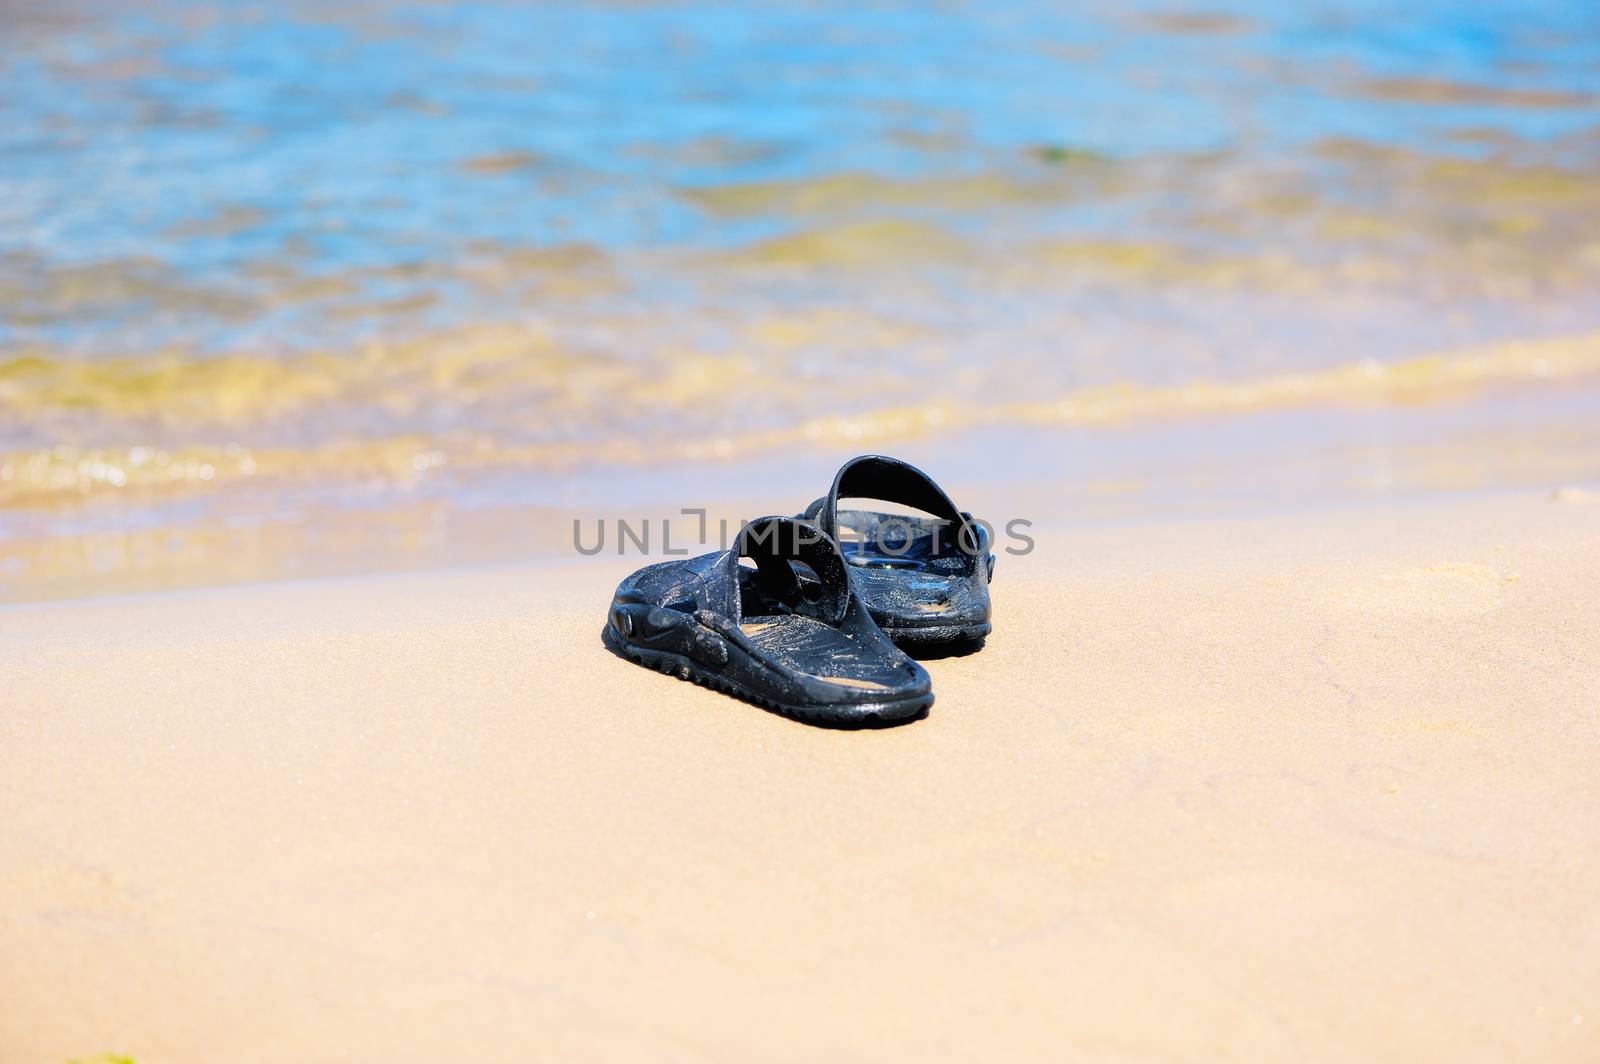 Rubber sandals on the sandy beach